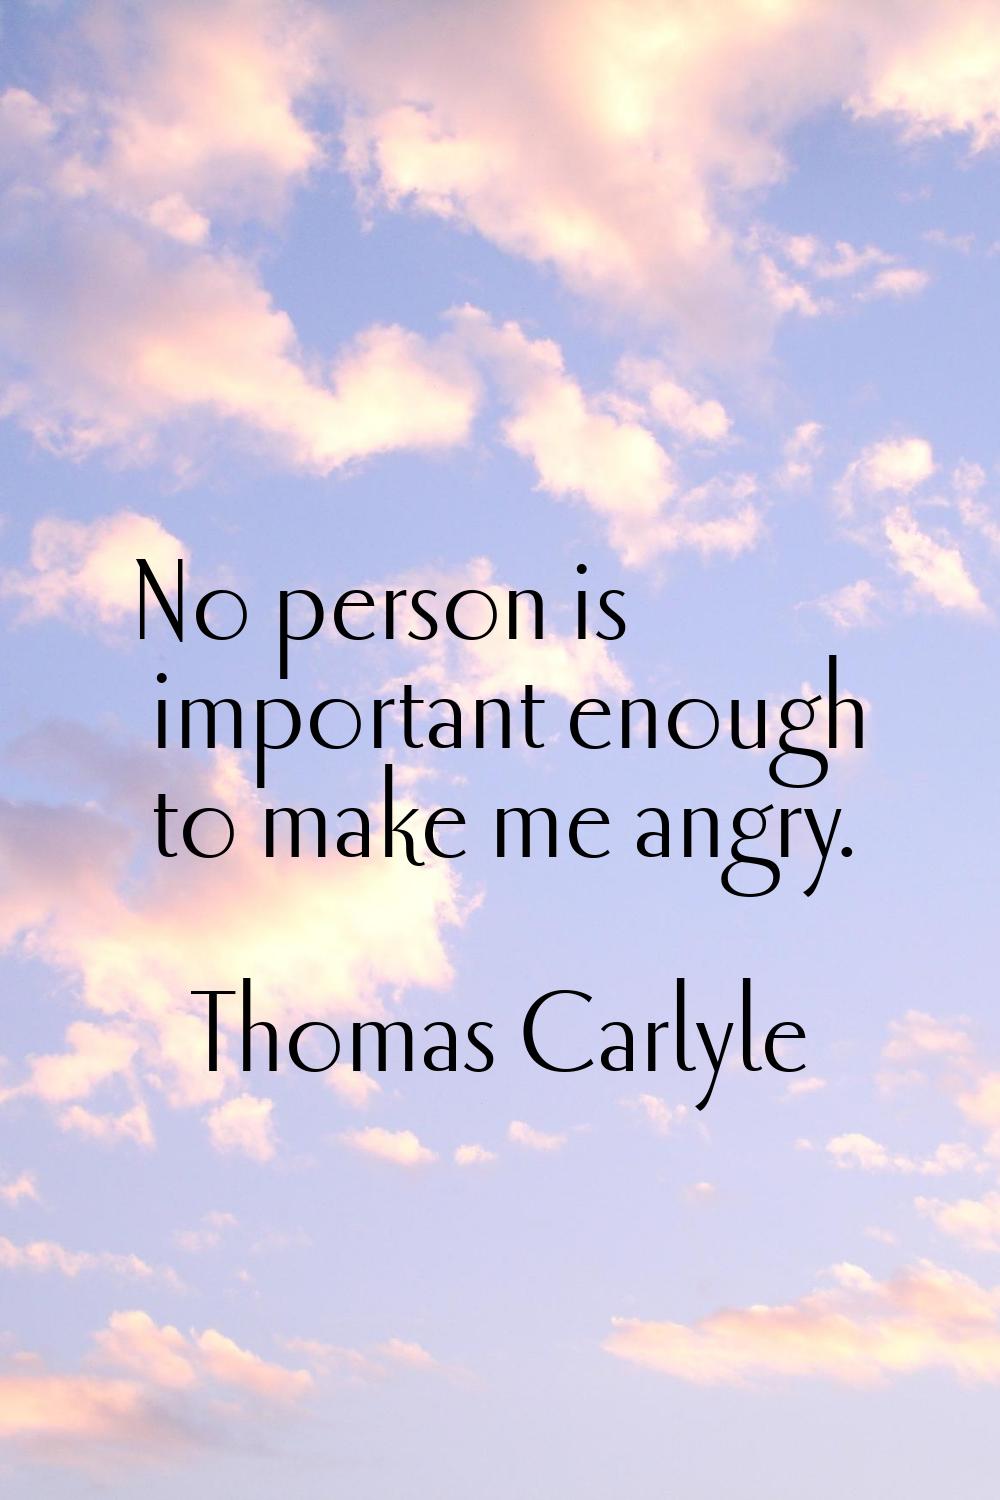 No person is important enough to make me angry.